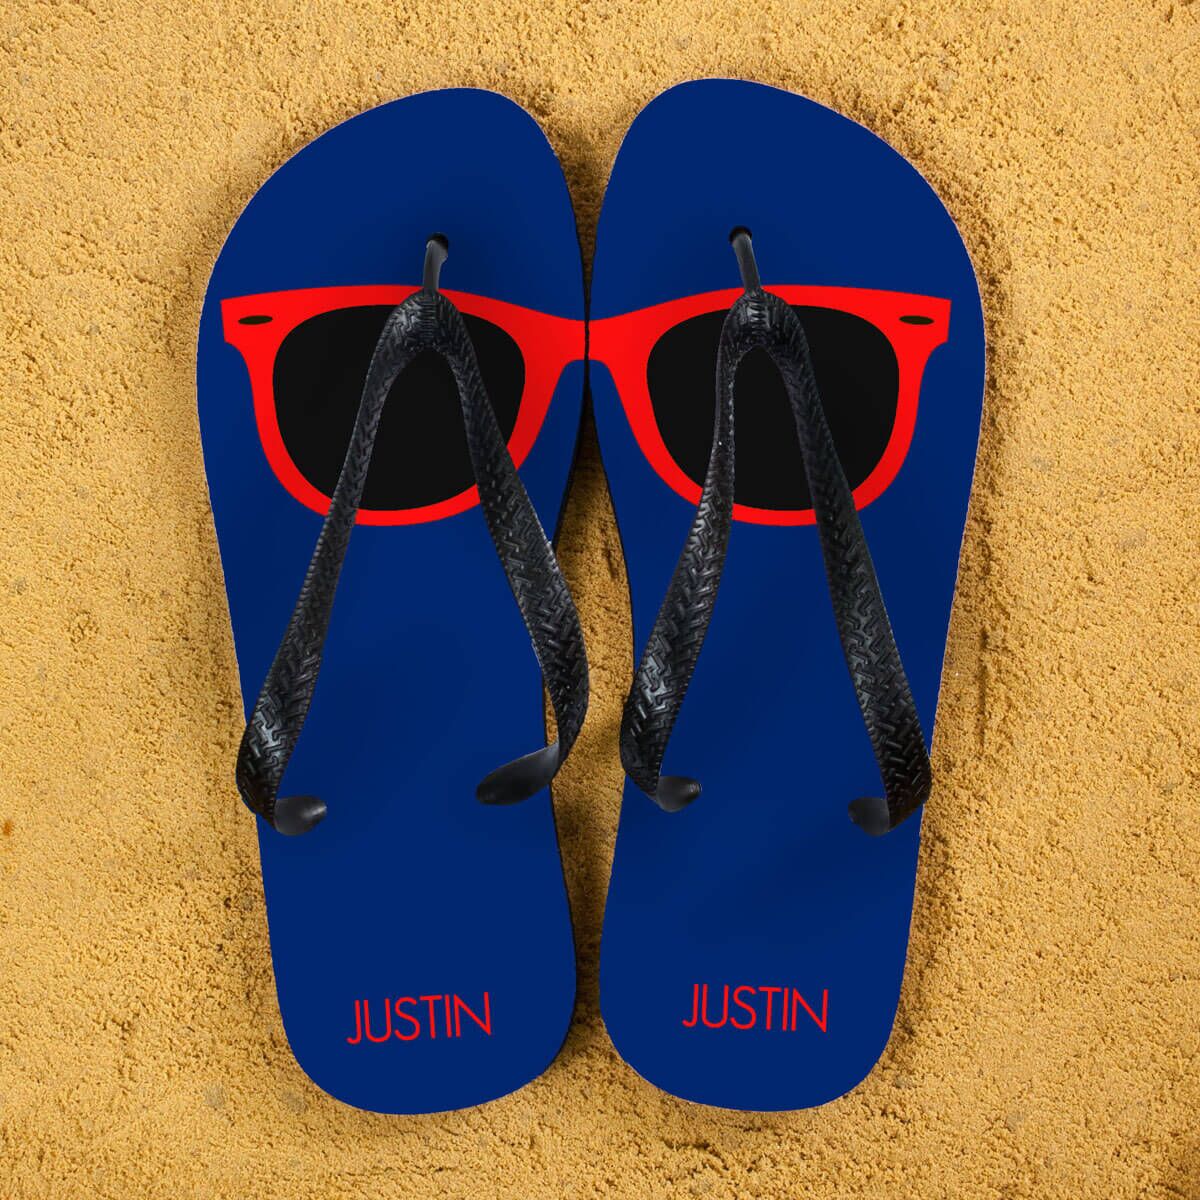 Personalised Adults Flip Flops (Navy & Red) – Sunglasses